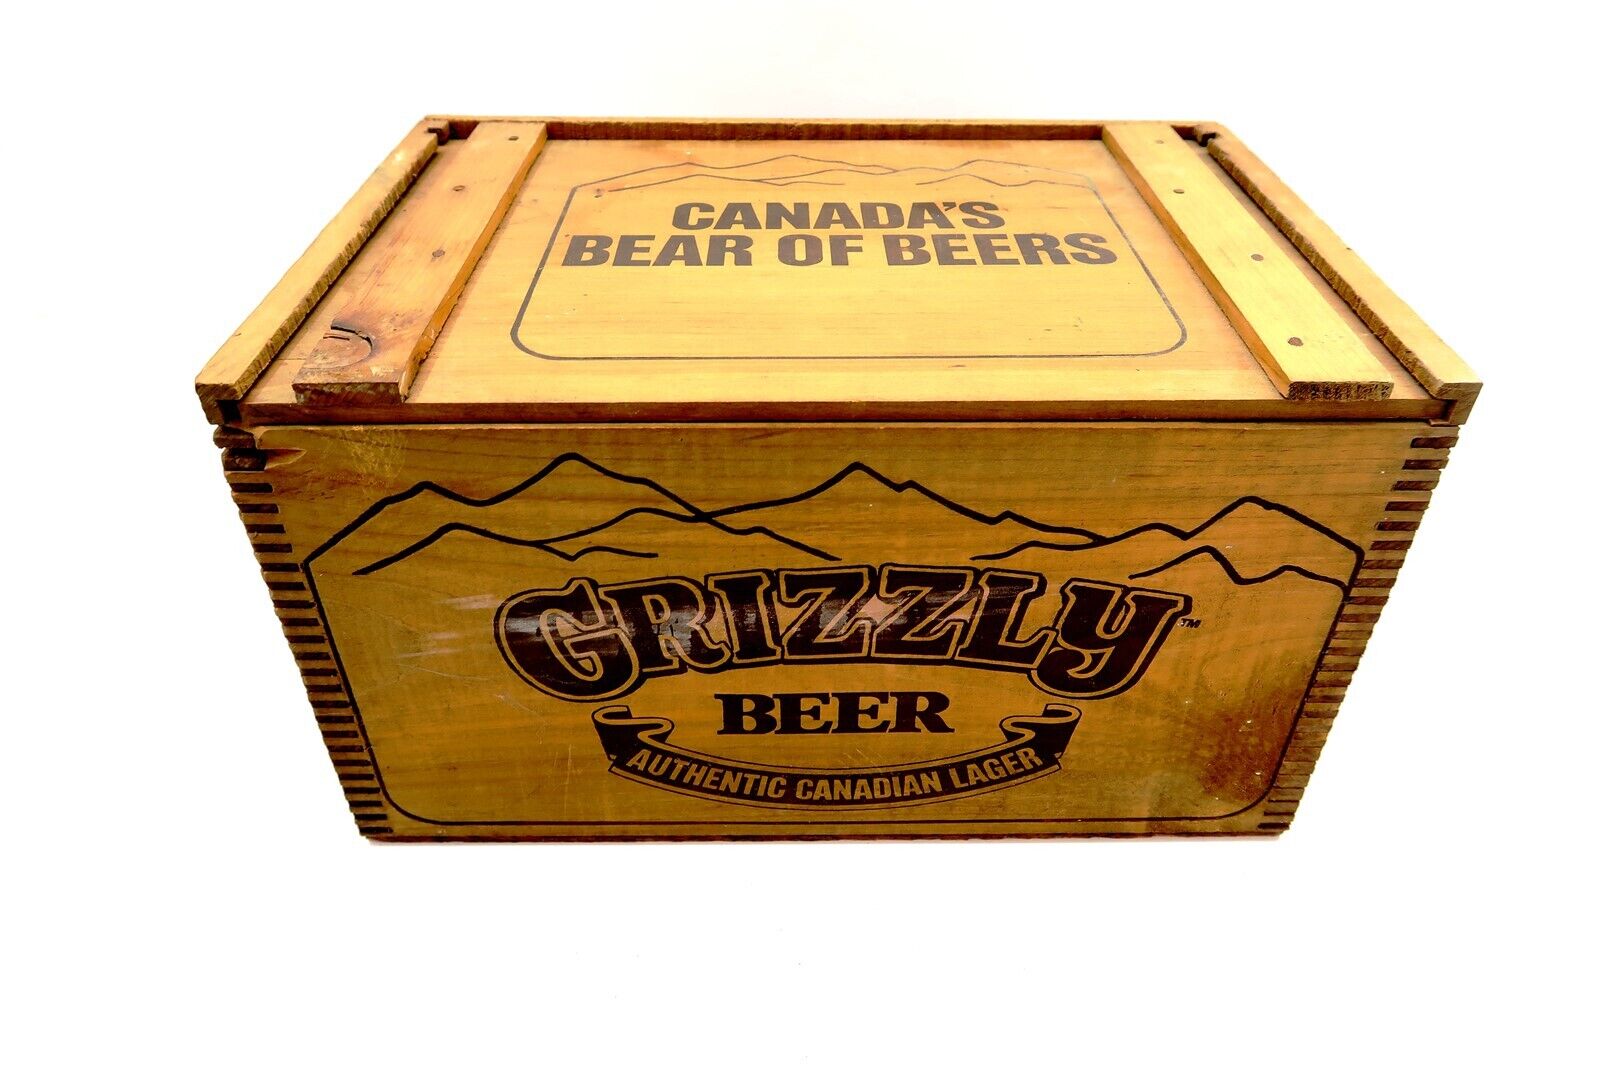 Vintage GRIZZLY BEER Dovetail Wooden Box Crate with Slide Top from Canada Lager